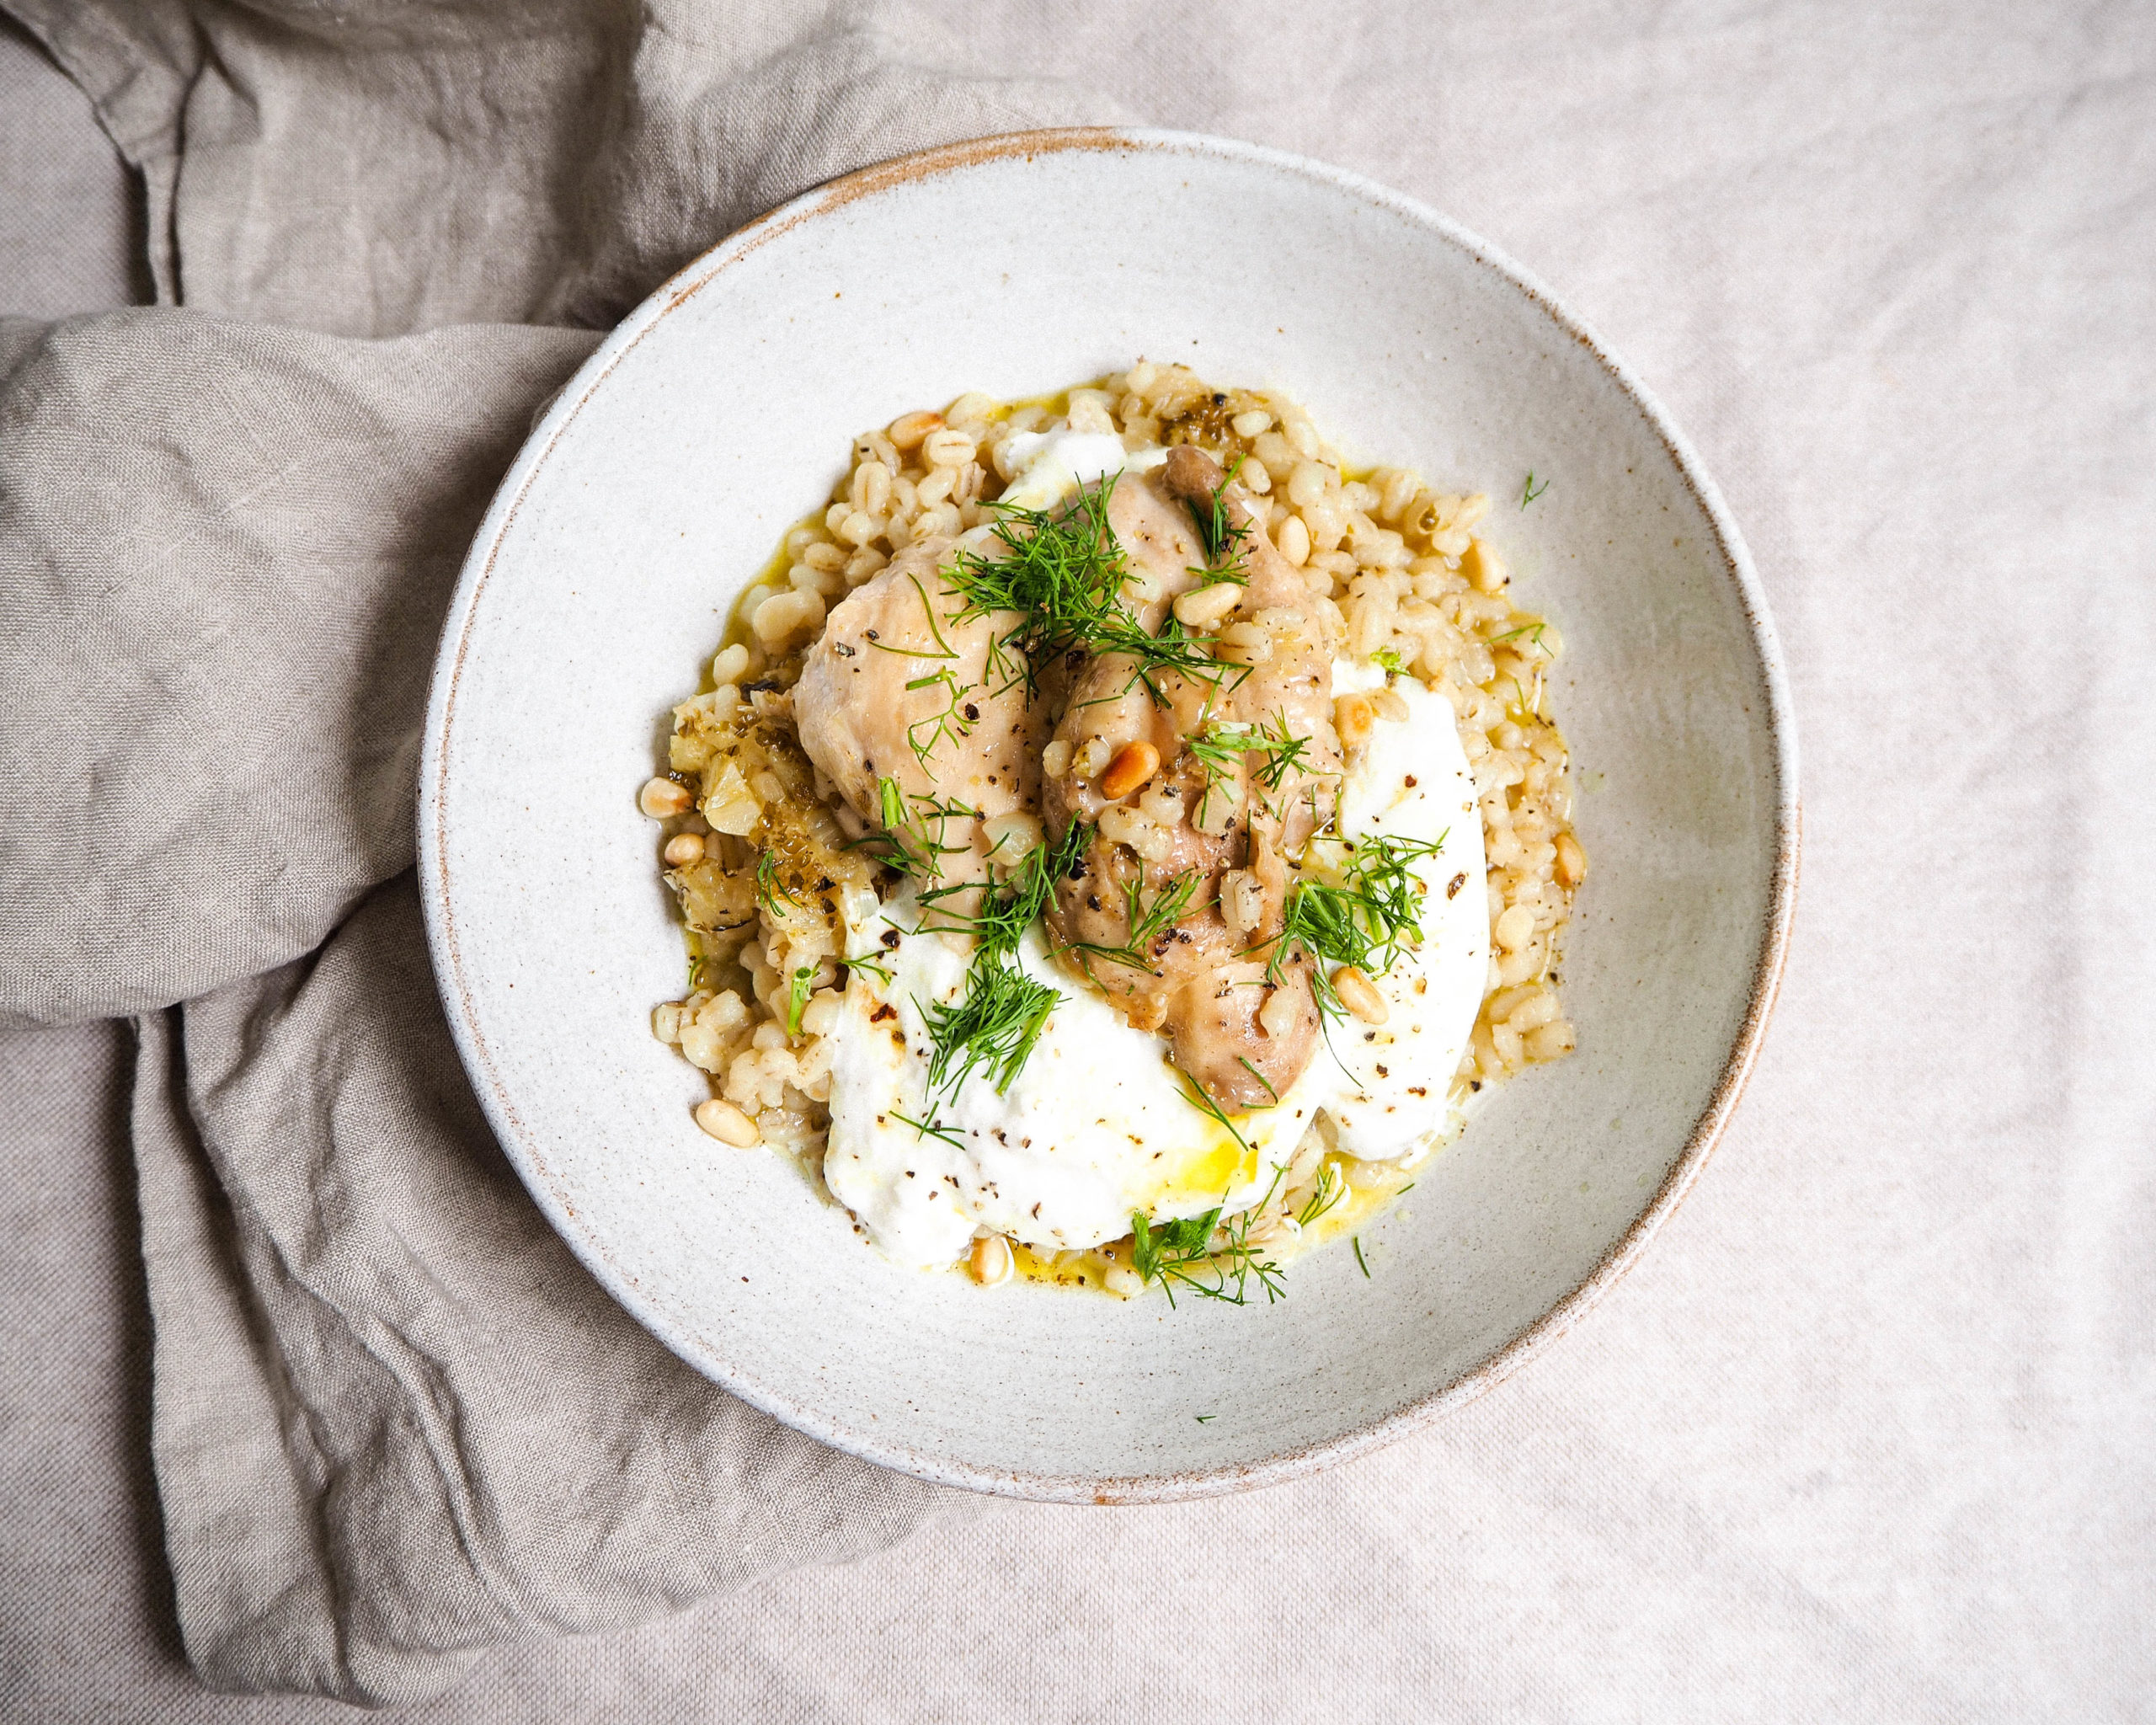 A white bowl is shown from above containing chicken over barley and buratta, with sprigs of dill on top.